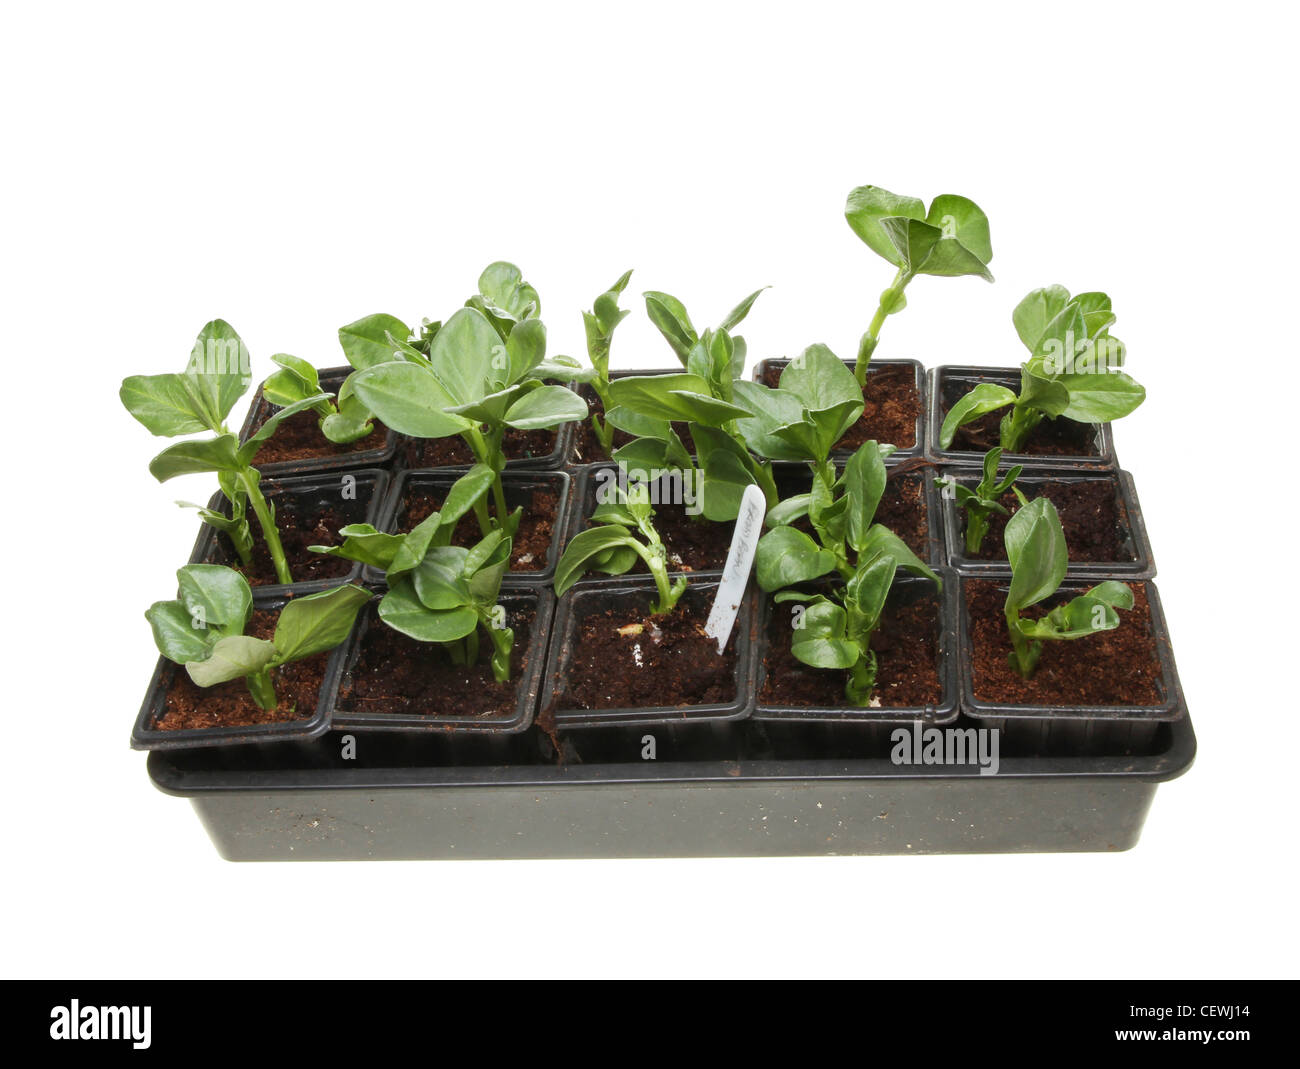 Pots of broad bean seedlings in a tray isolated against white Stock Photo